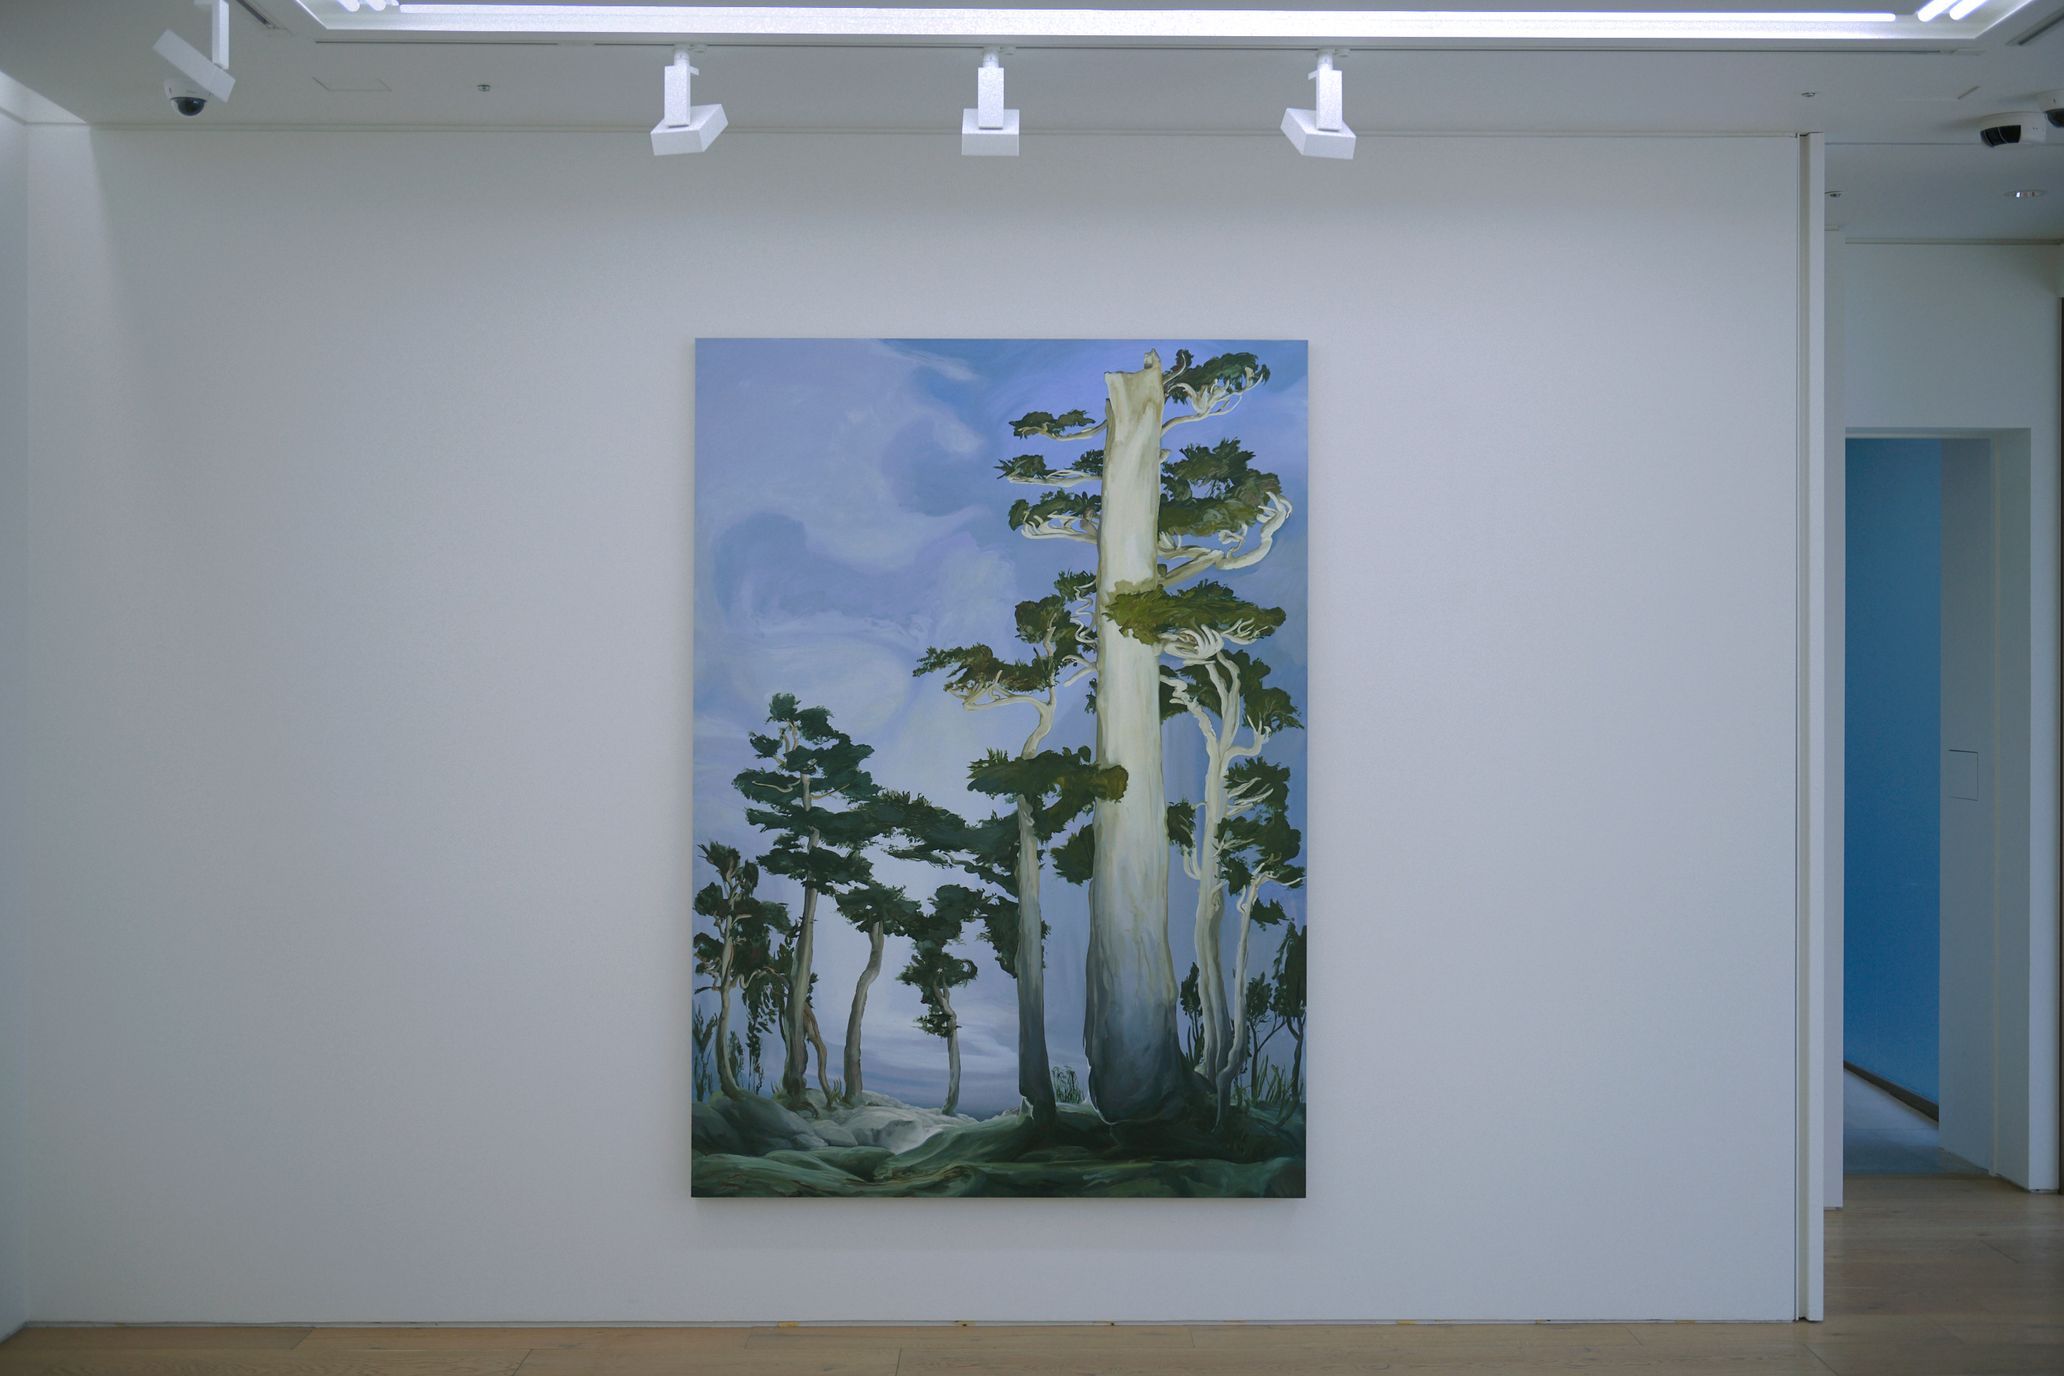 A Hybrid of Technology and Oil Painting: Emma Webster’s Landscape on the boundary